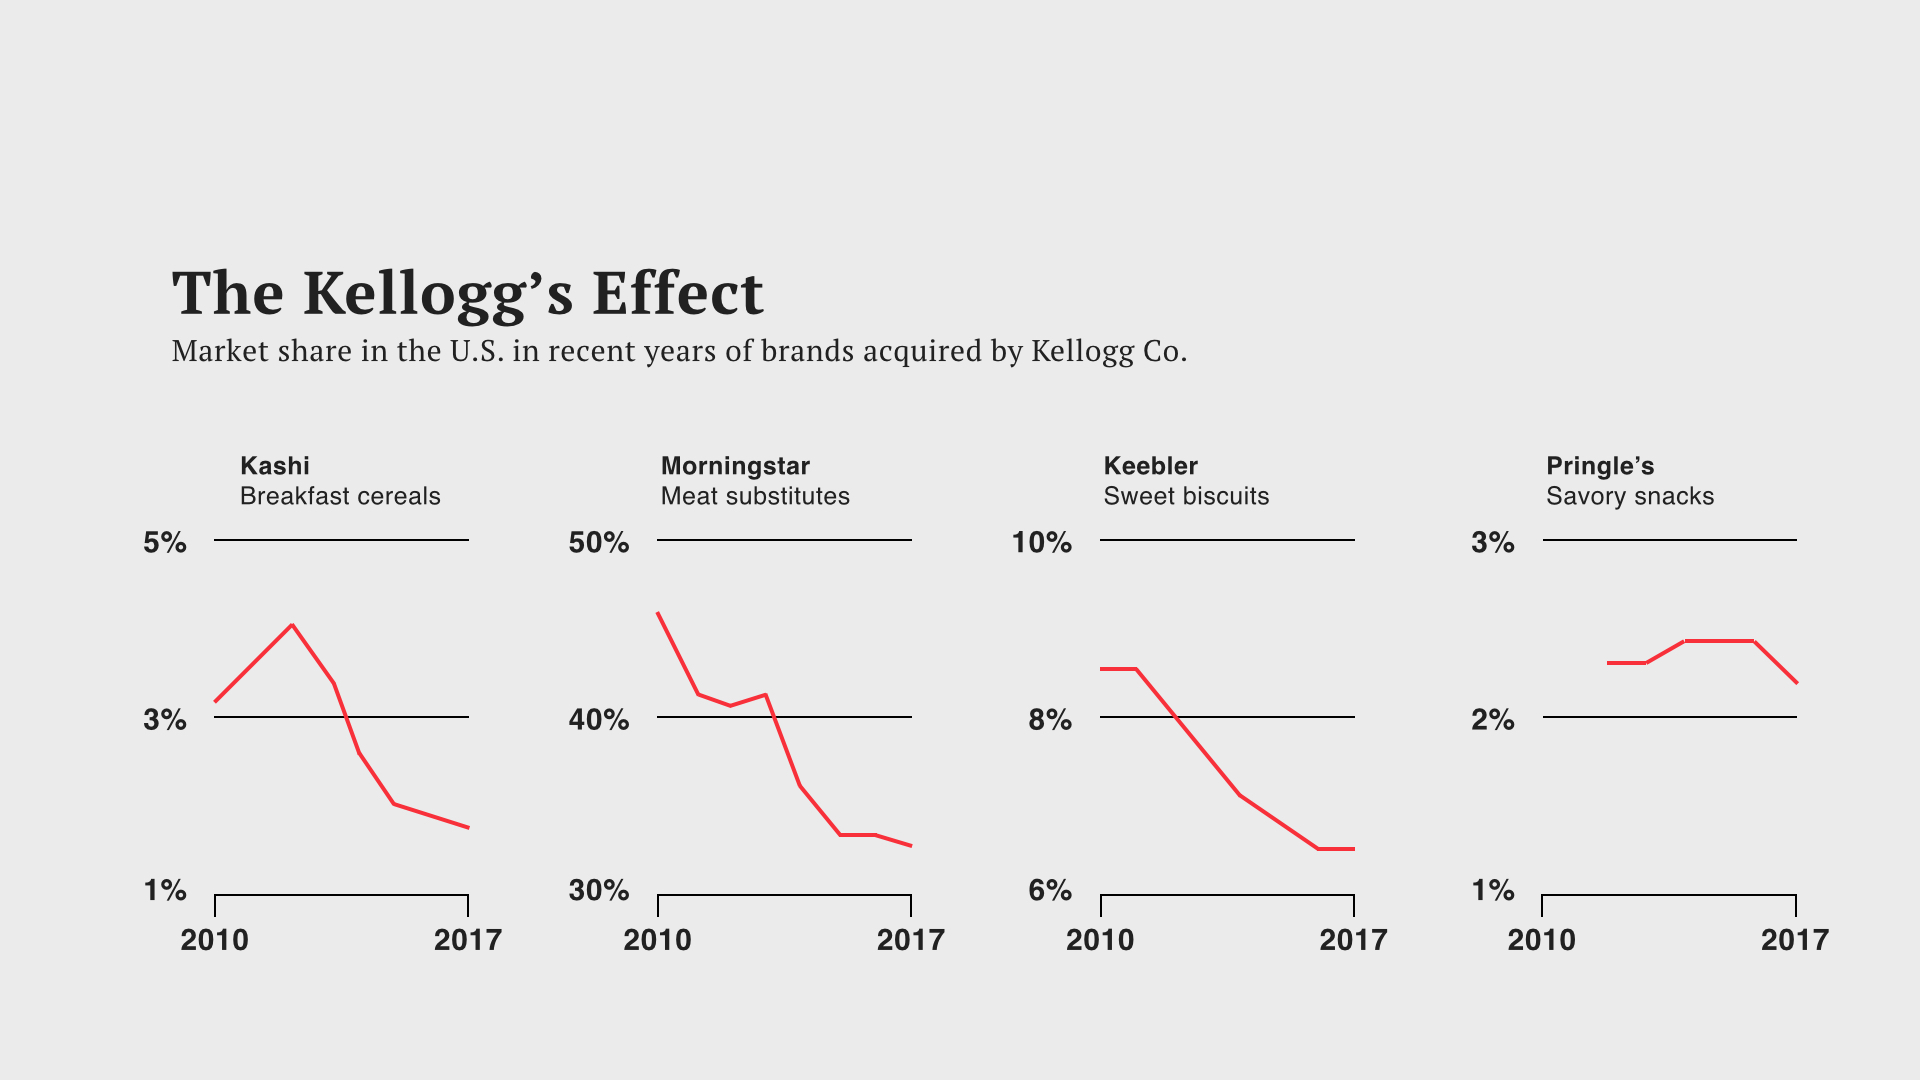  And this too isn't working. Popular brands acquired by Kellogg's have declined in market share, in just a few years of their acquisitions. So what does this all say? The food industry is at a tipping point… 